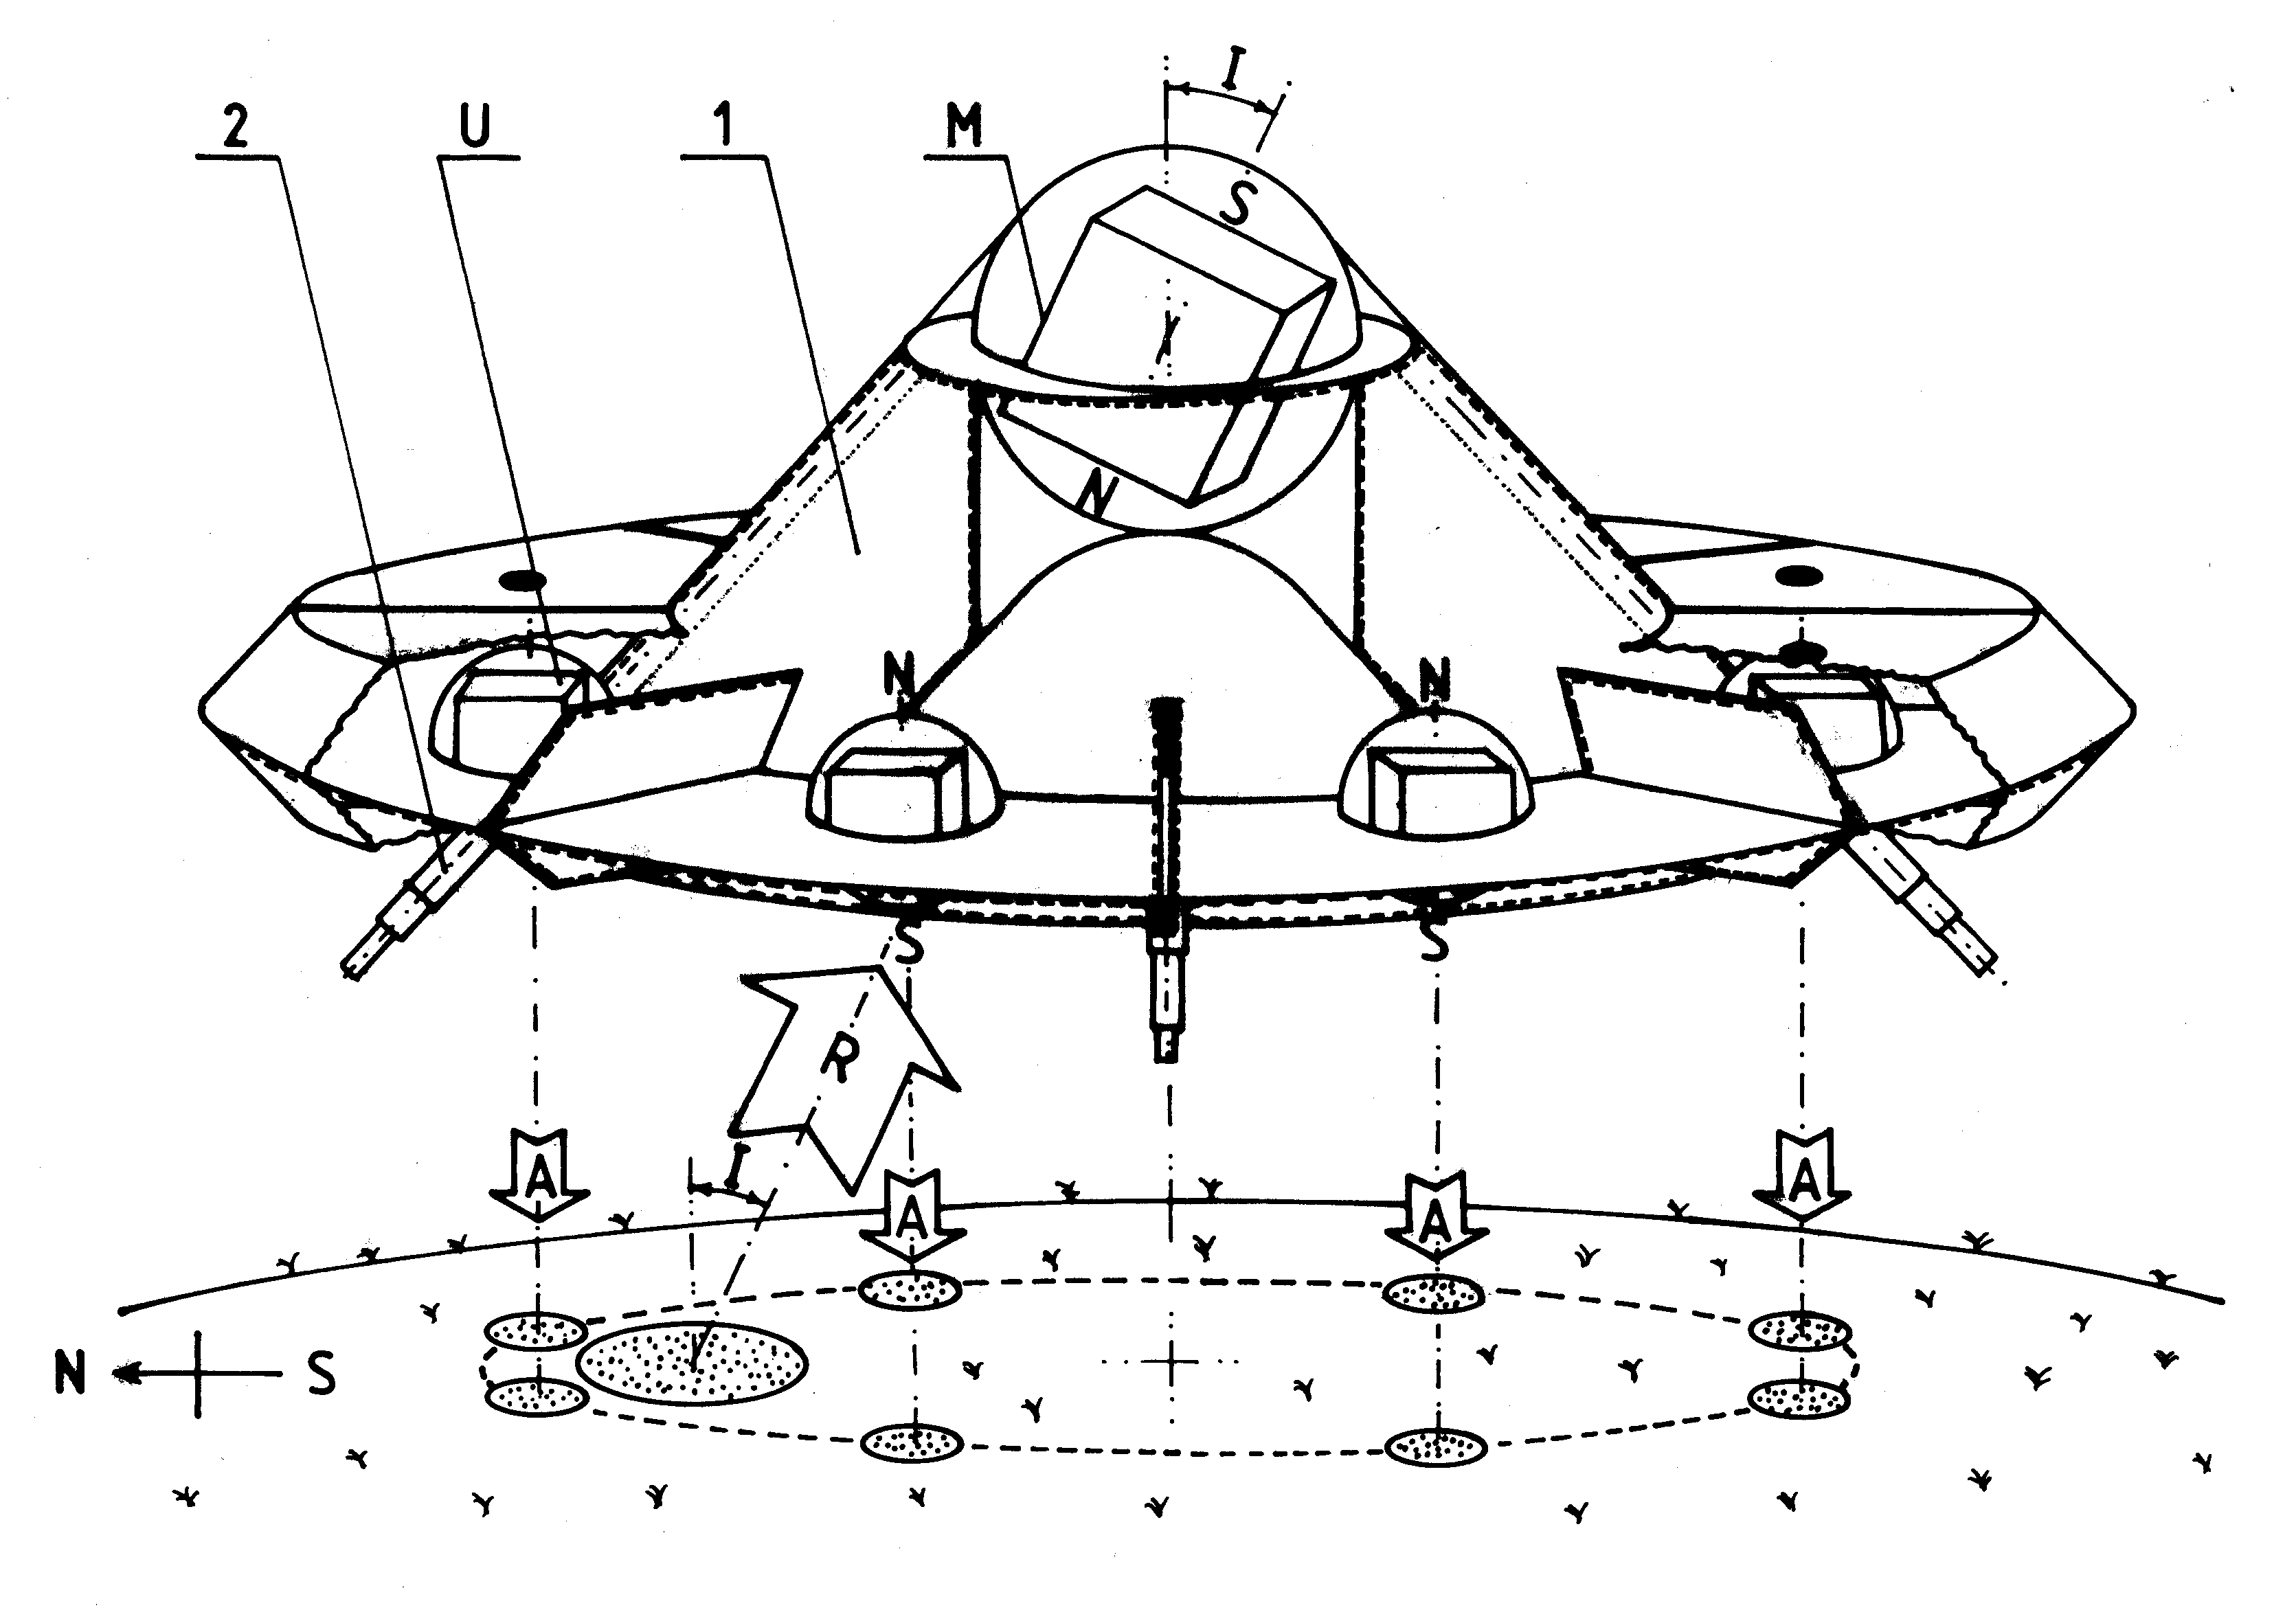 Design and operation of the Magnocraft